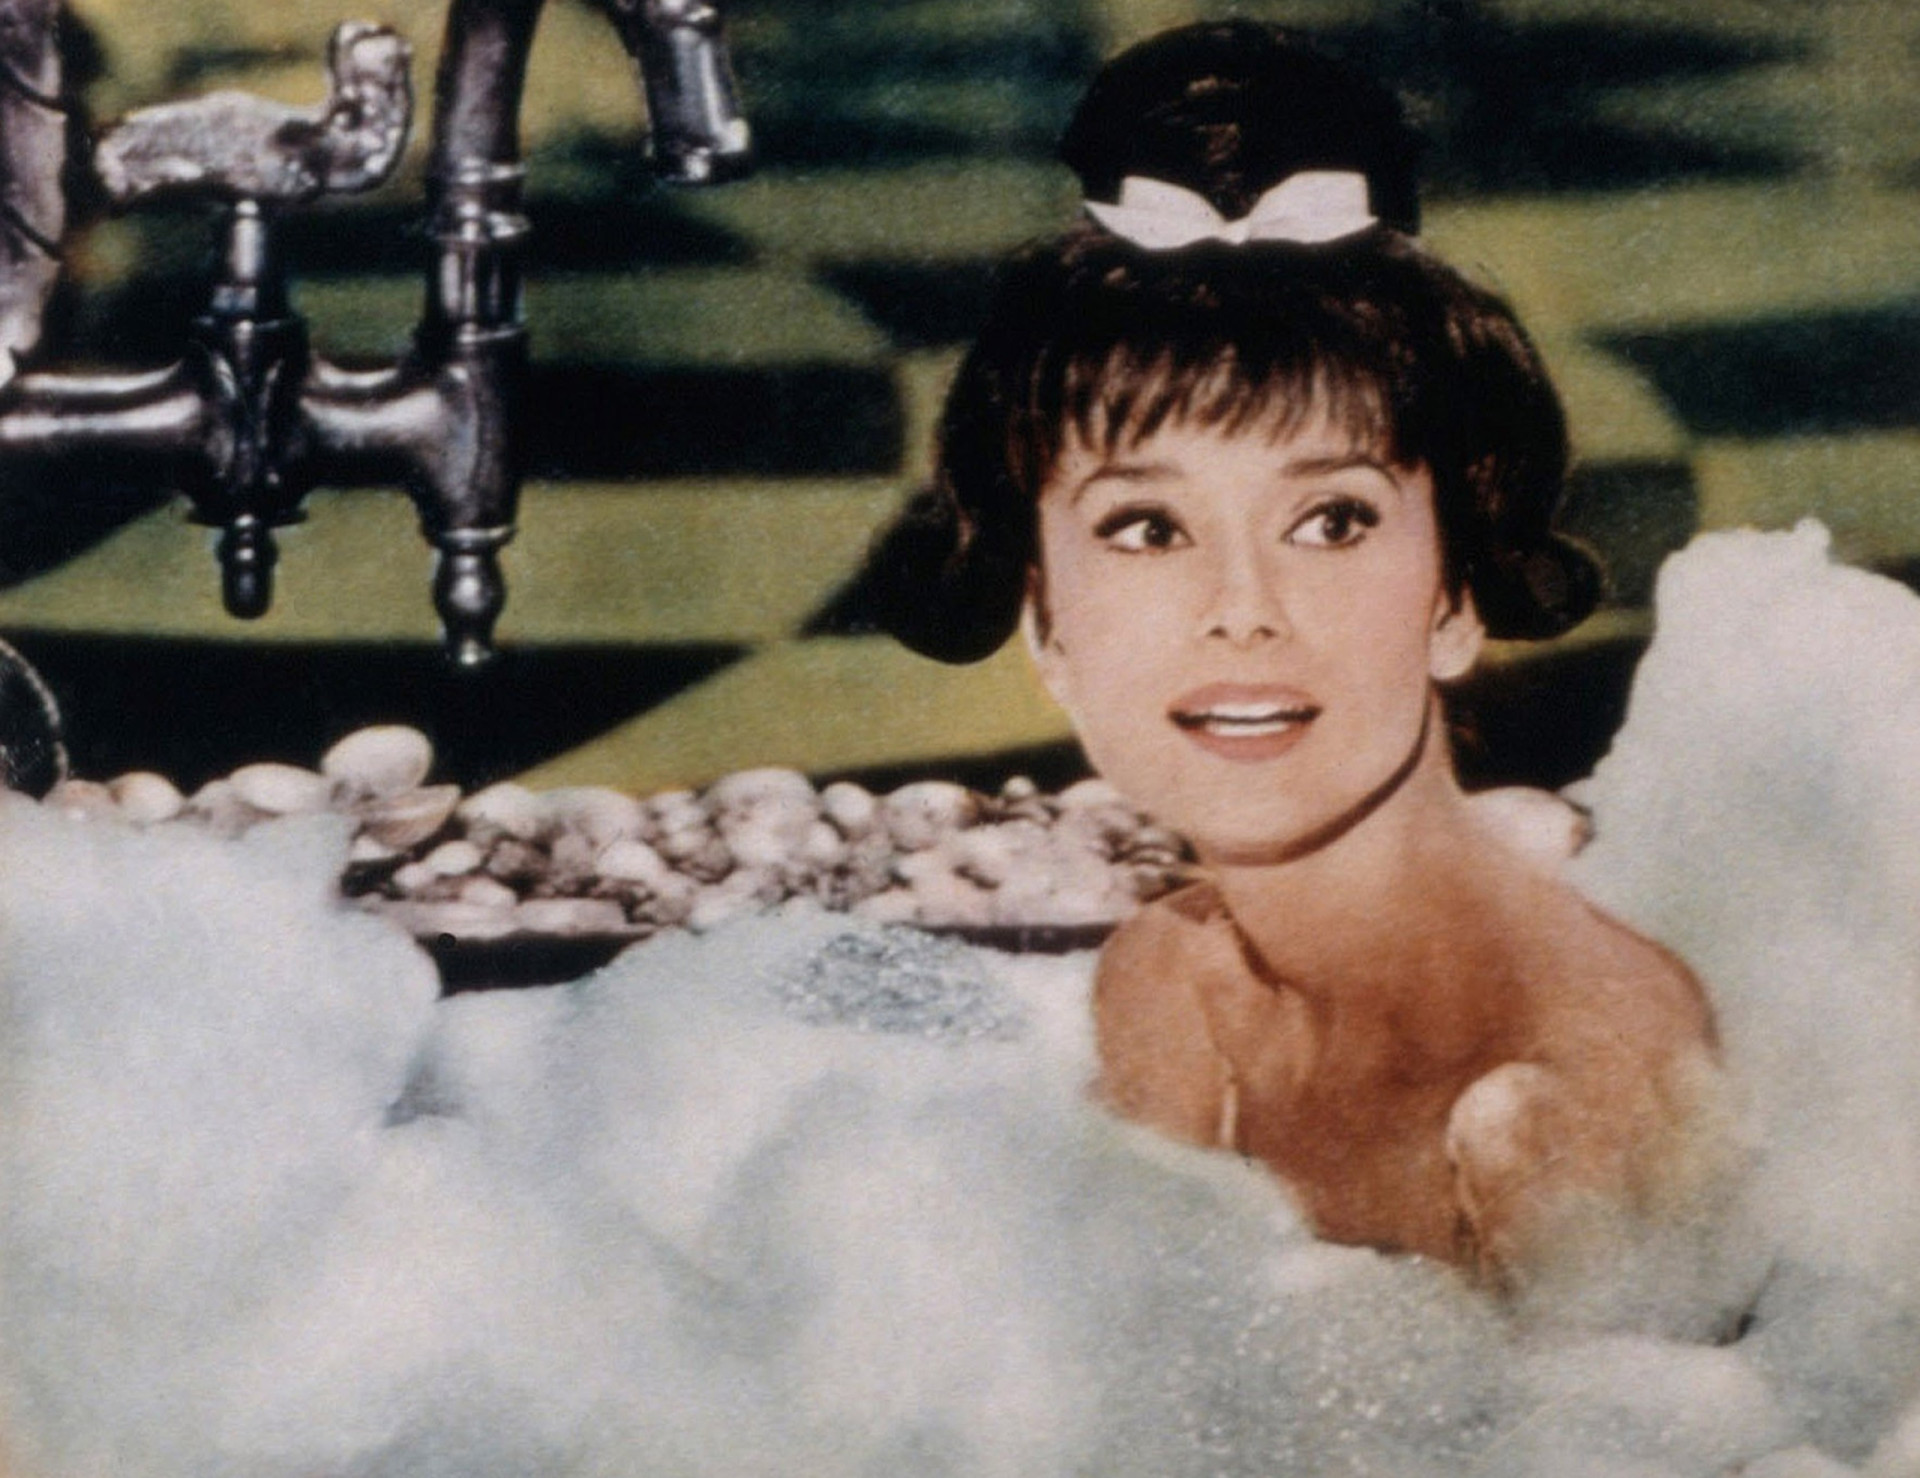 <p>Audrey Hepburn cools down in the bathtub in this scene from the romantic comedy 'Paris When It Sizzles.'</p><p><a href="https://www.msn.com/en-us/community/channel/vid-7xx8mnucu55yw63we9va2gwr7uihbxwc68fxqp25x6tg4ftibpra?cvid=94631541bc0f4f89bfd59158d696ad7e">Follow us and access great exclusive content every day</a></p>